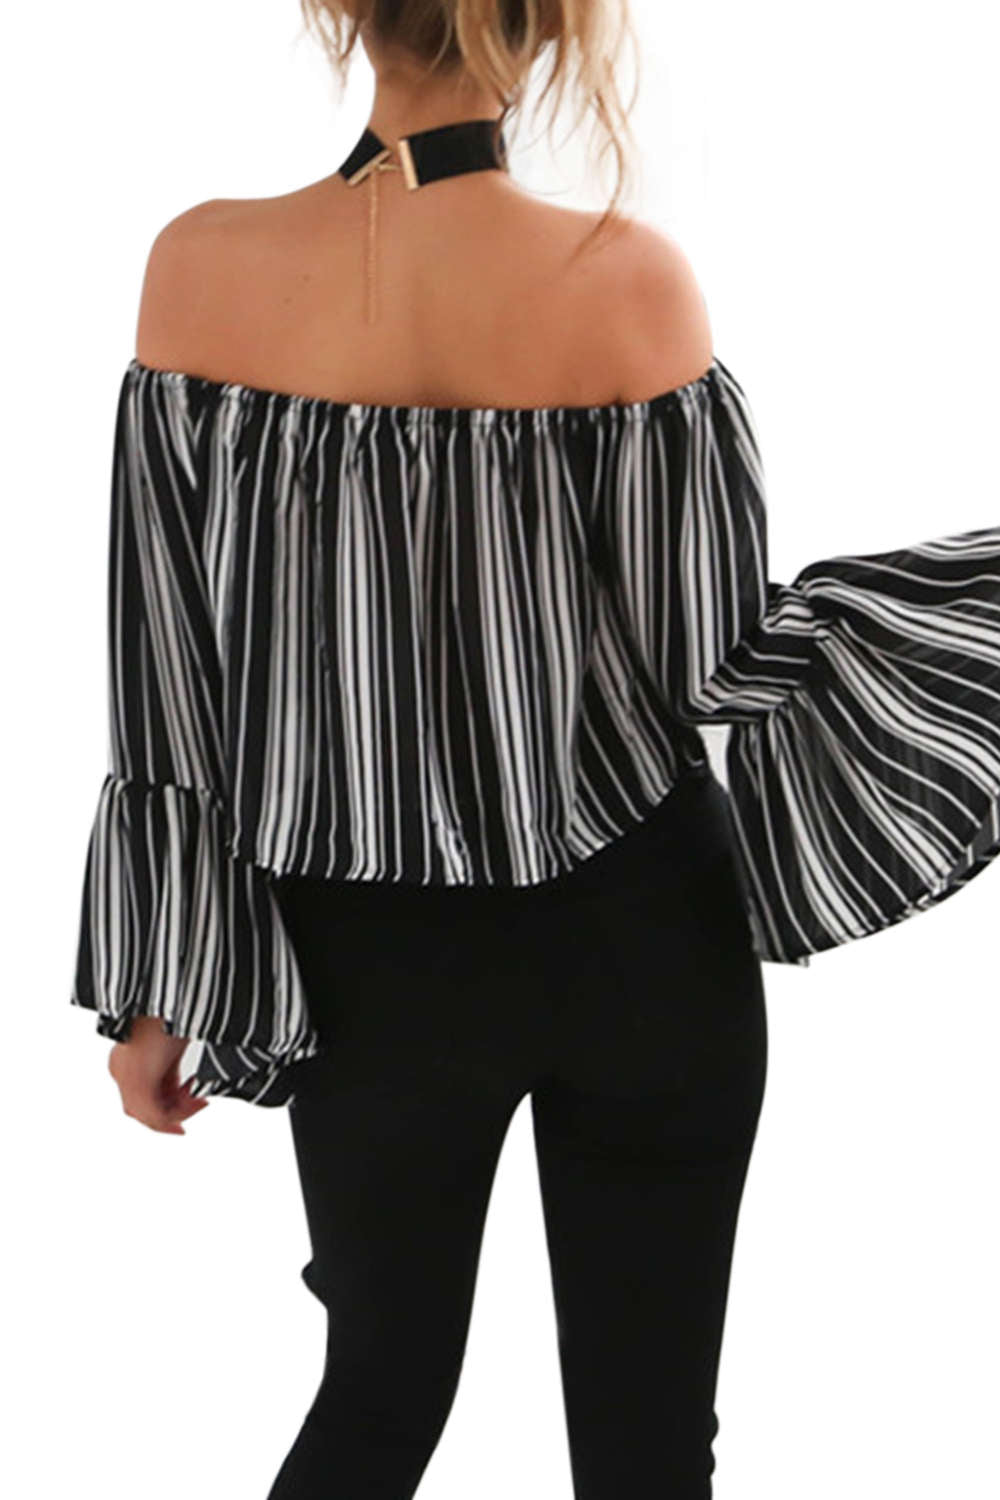 Iyasson Women's Off Shoulder Striped Casual Blouses